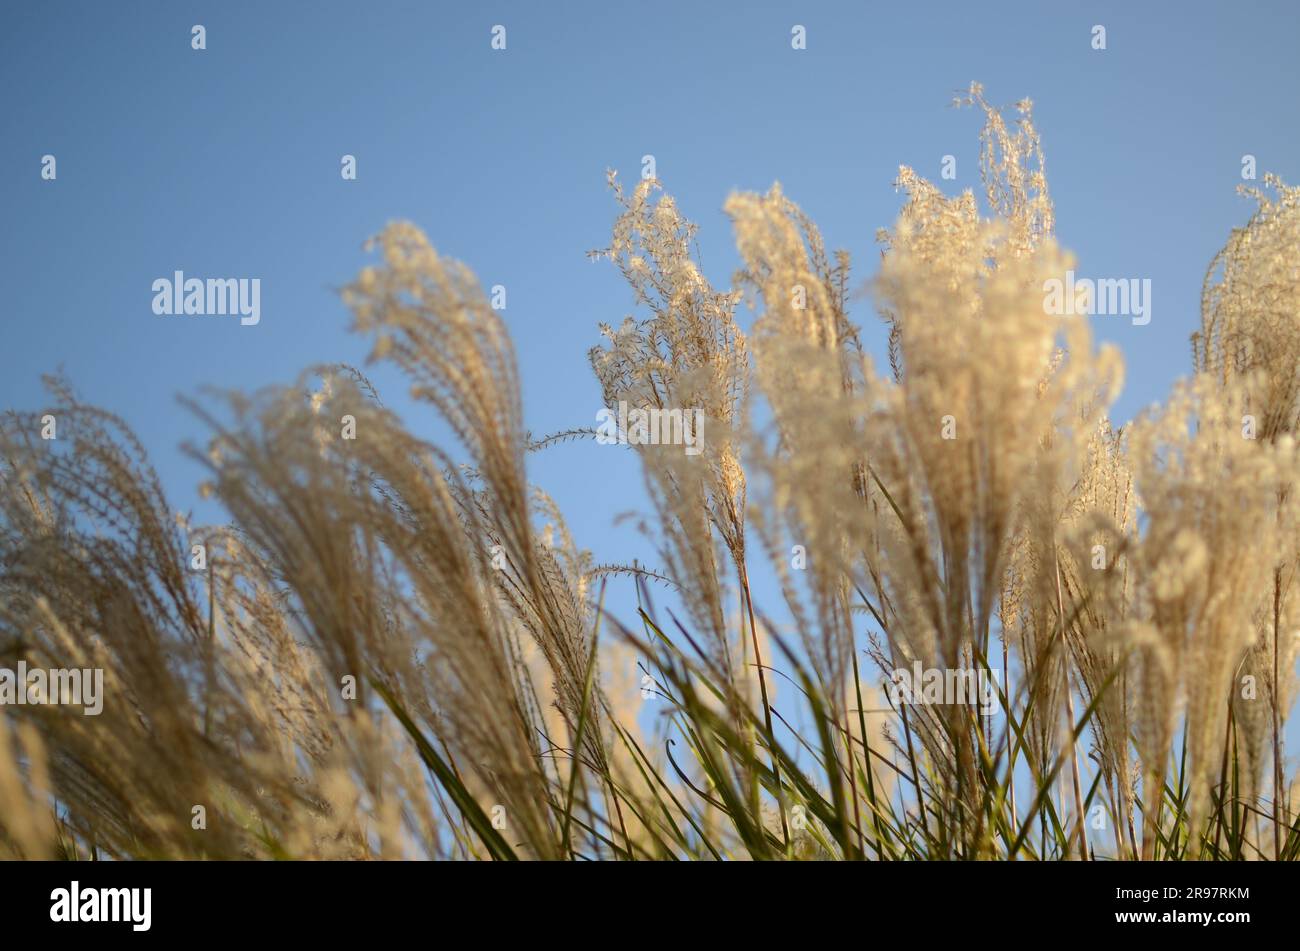 Beach Grass With Blue Sky Background. Stock Photo